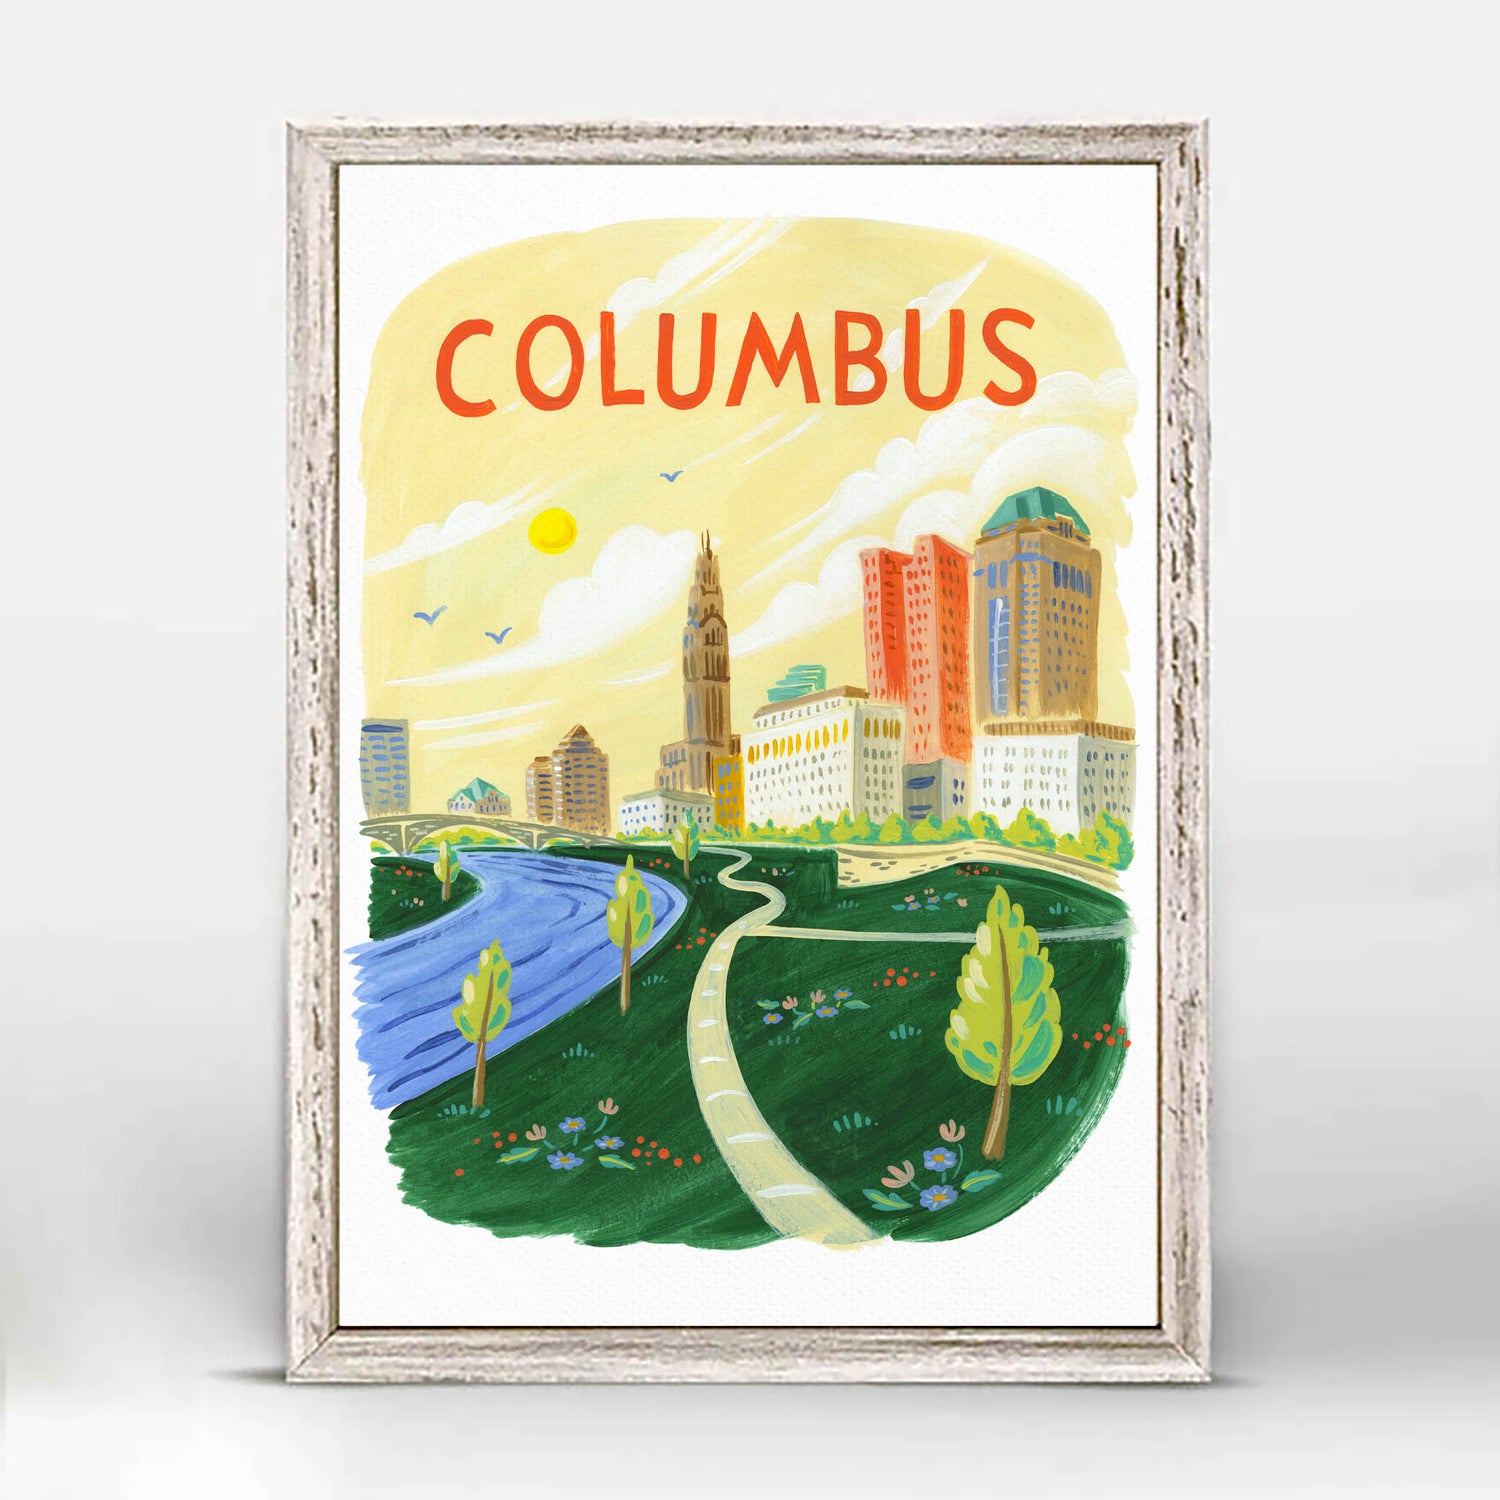 Downtown Columbus Riverfront illustration with Scioto Mile; artwork by Angela Staehling